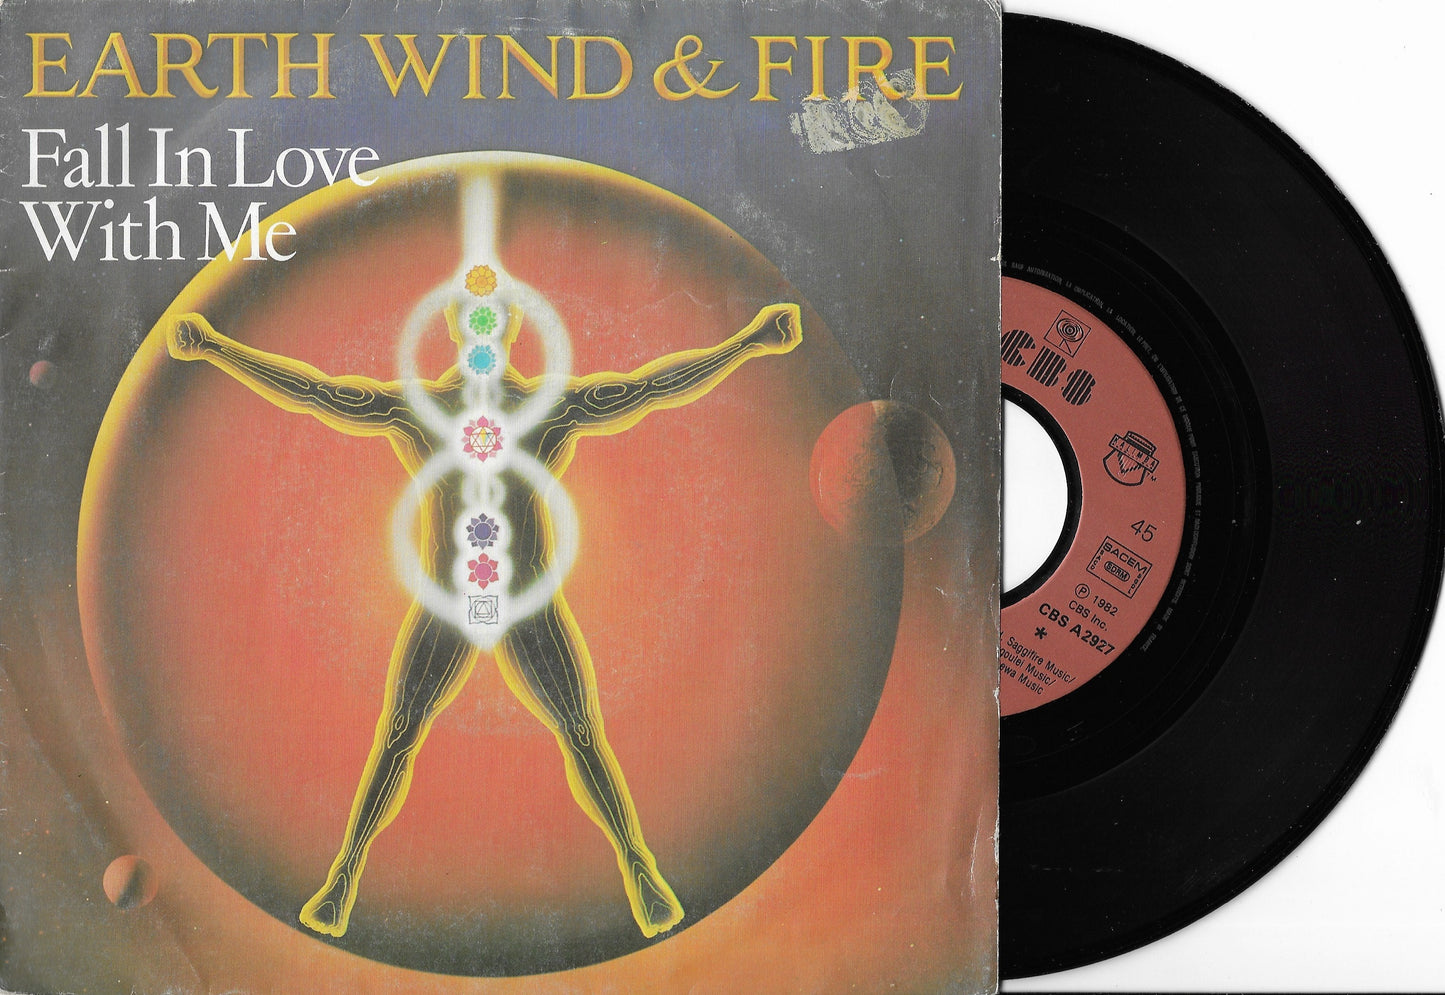 EARTH, WIND & FIRE - Fall In Love With Me